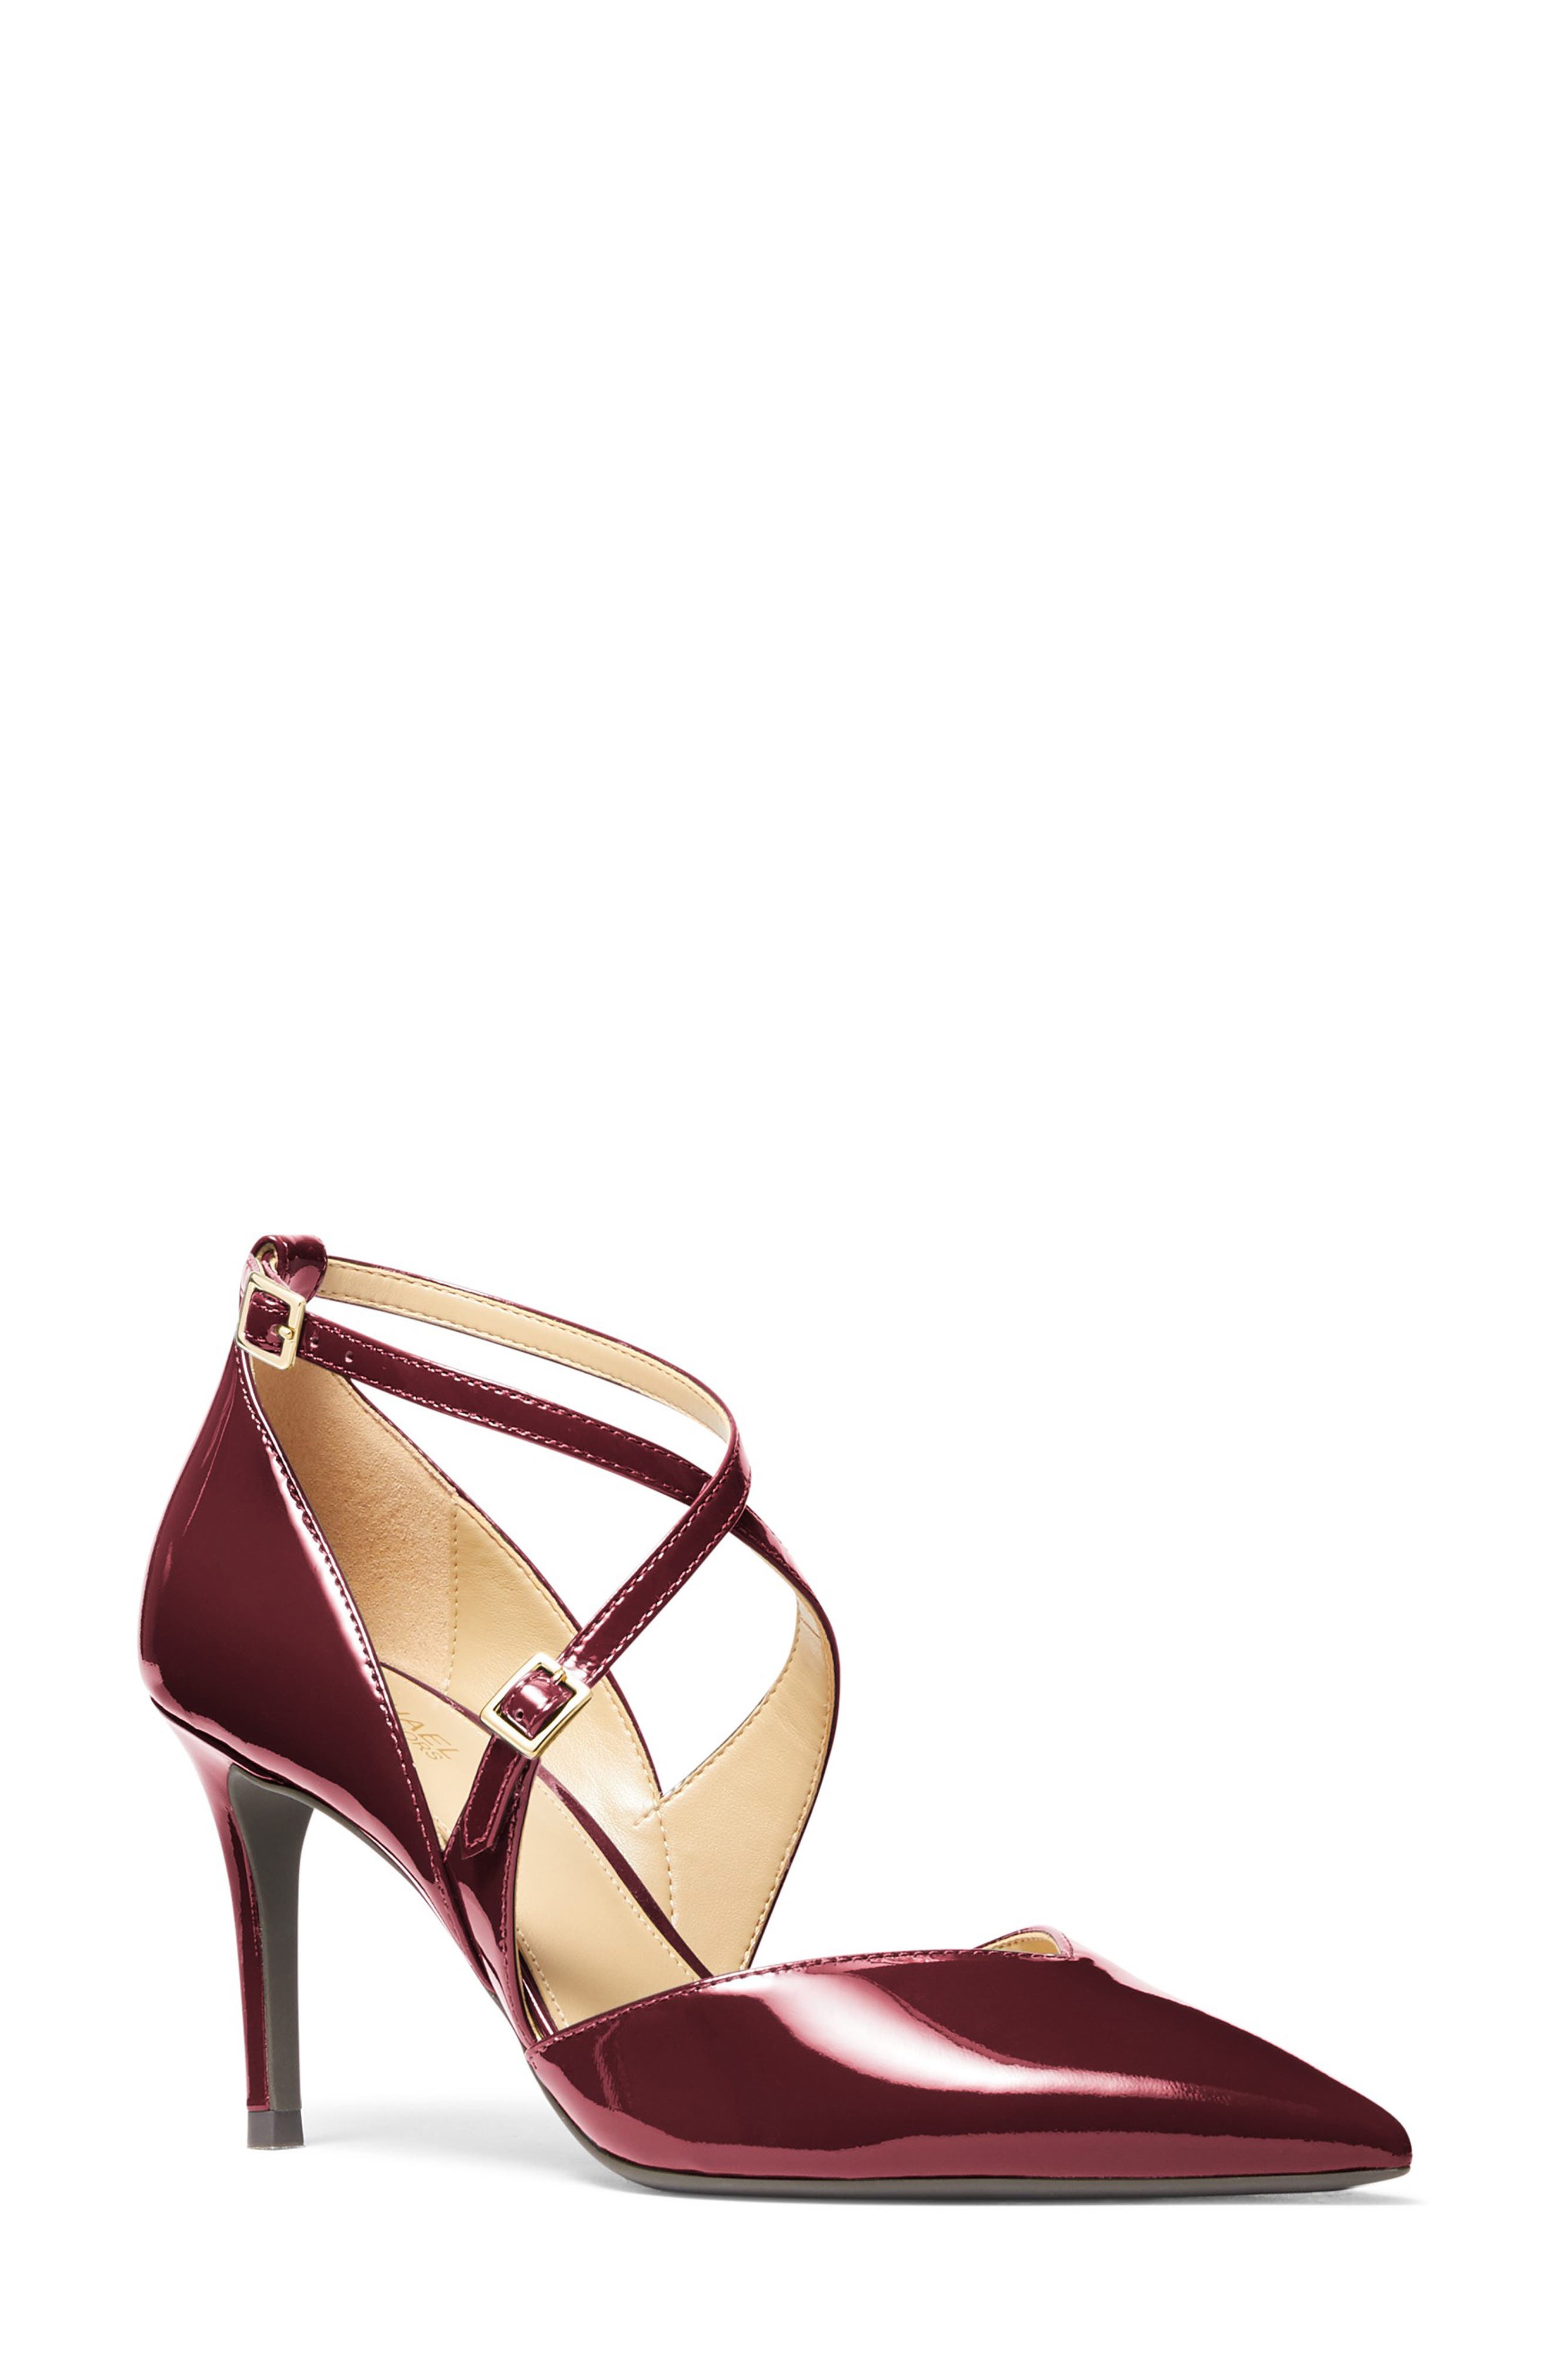 UPC 195512469824 product image for MICHAEL Michael Kors Adela Pump in Dark Berry at Nordstrom, Size 7 | upcitemdb.com